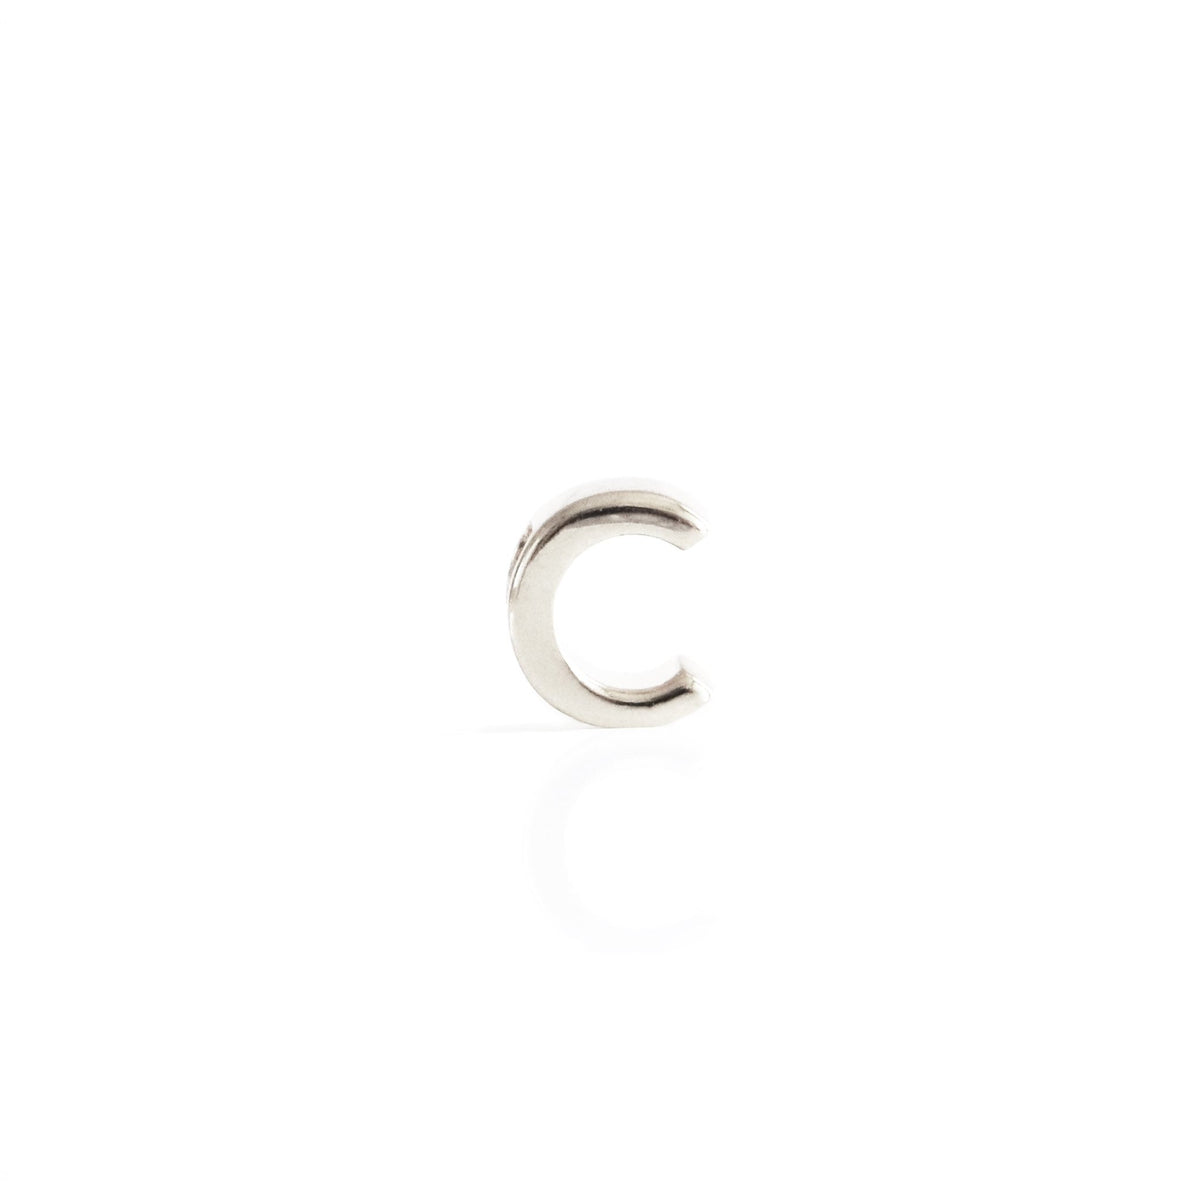 CHARMED INITIAL - C - GOLD OR SILVER - SO PRETTY CARA COTTER